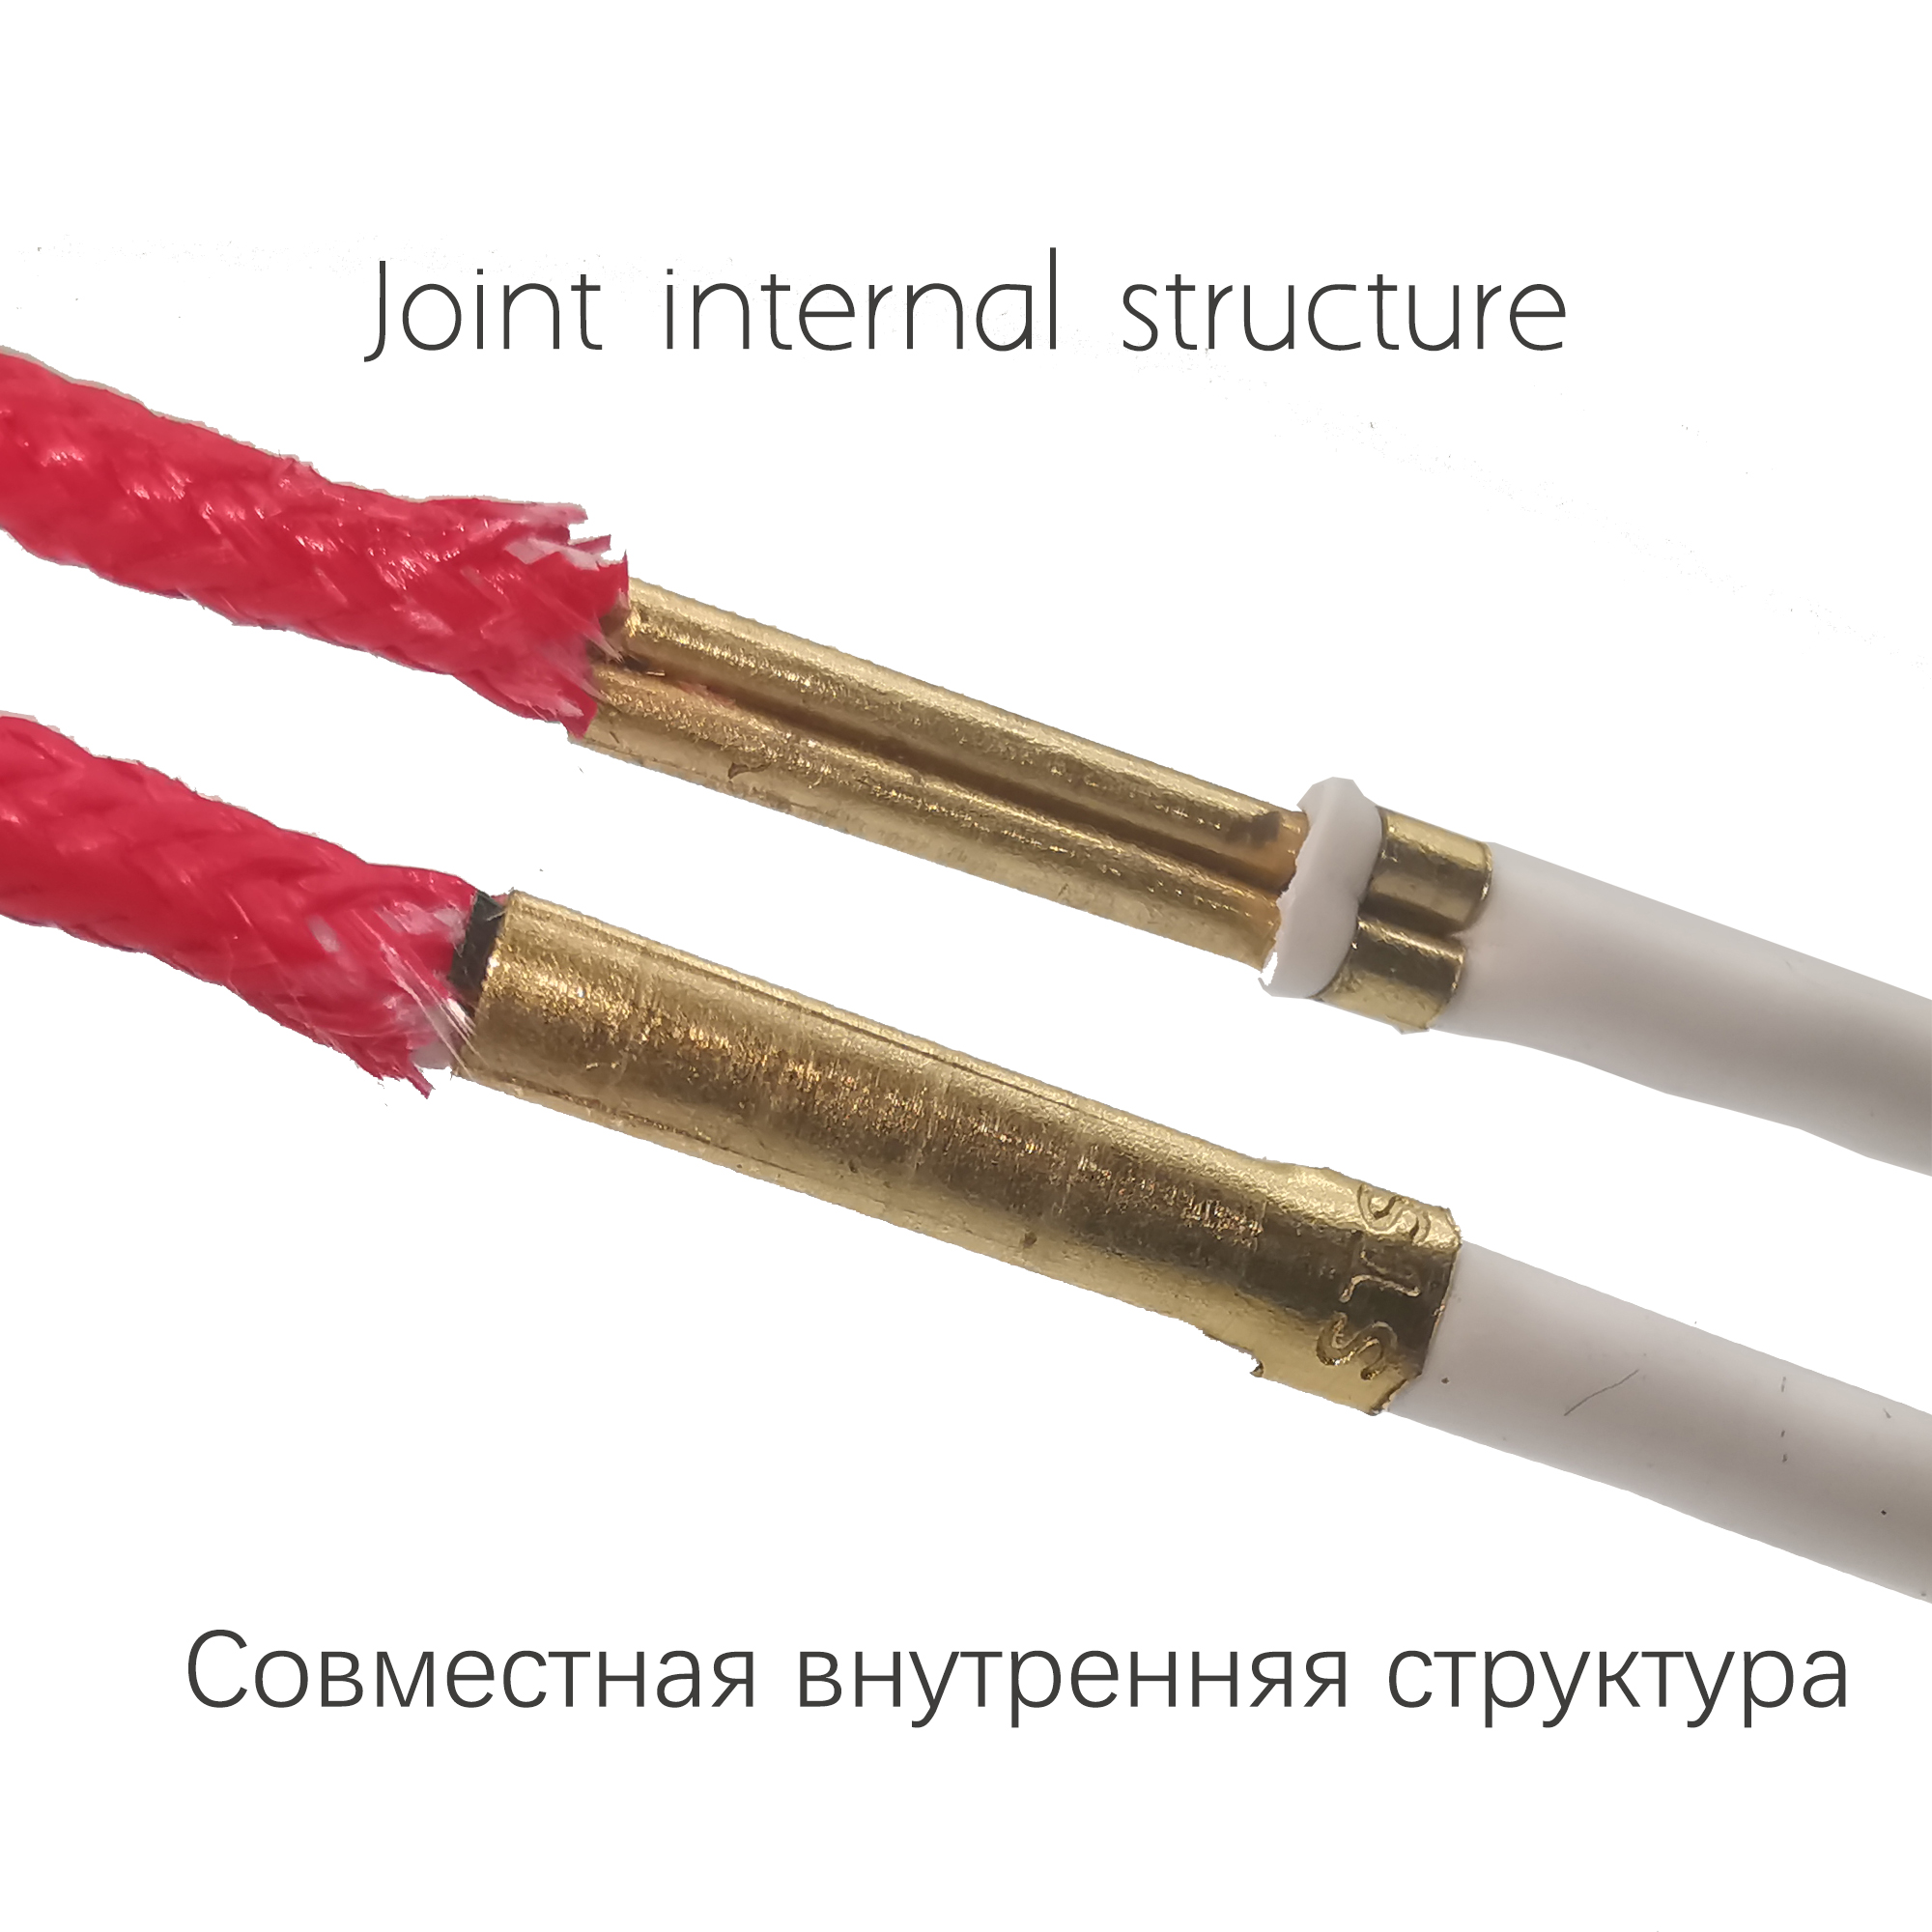 6K 10m 73w carbon fiber silicone rubber heating cable soft tough radiation-free heating wire warm Heat cable Electric heat